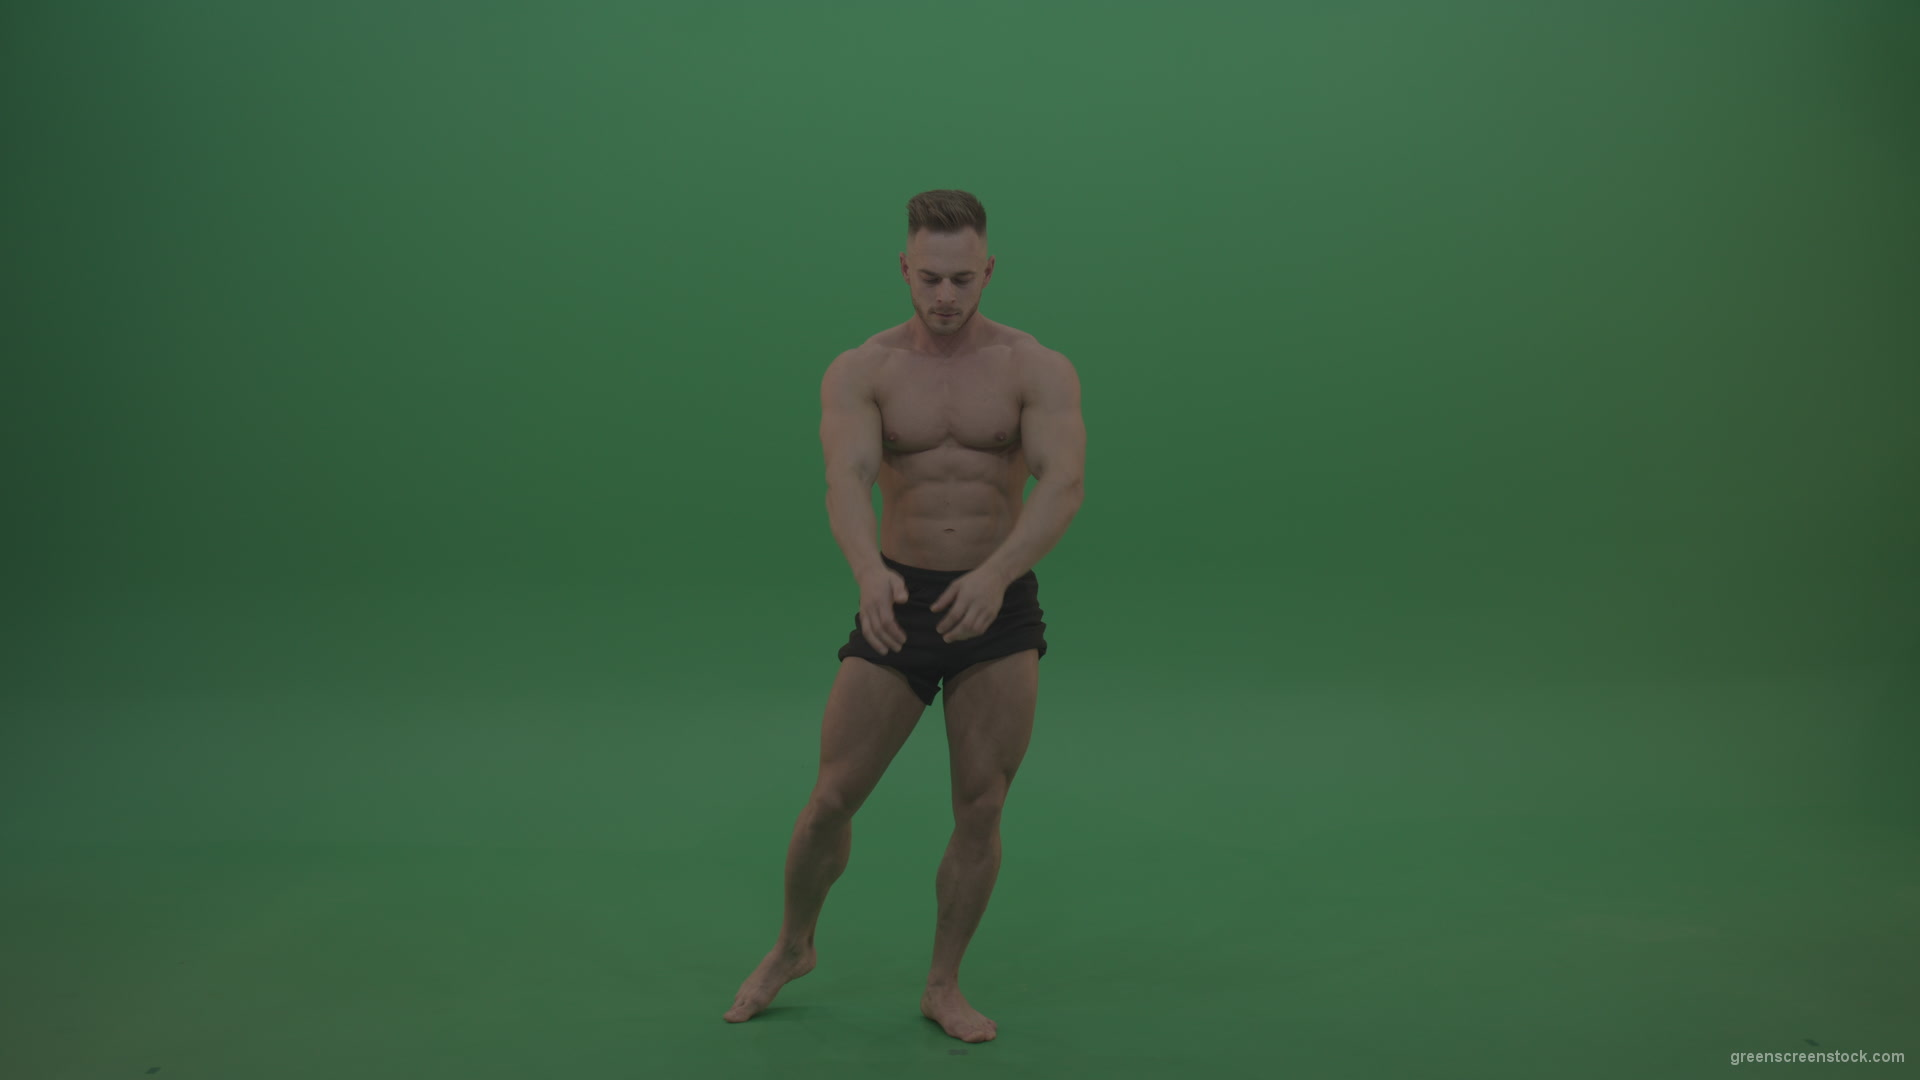 Young_Sportsman_Showing_Front_Double_Biceps_And_Thigh_Muscles_Bodybuilding_Positions_On_Gren_Screen_Wall_Background_005 Green Screen Stock